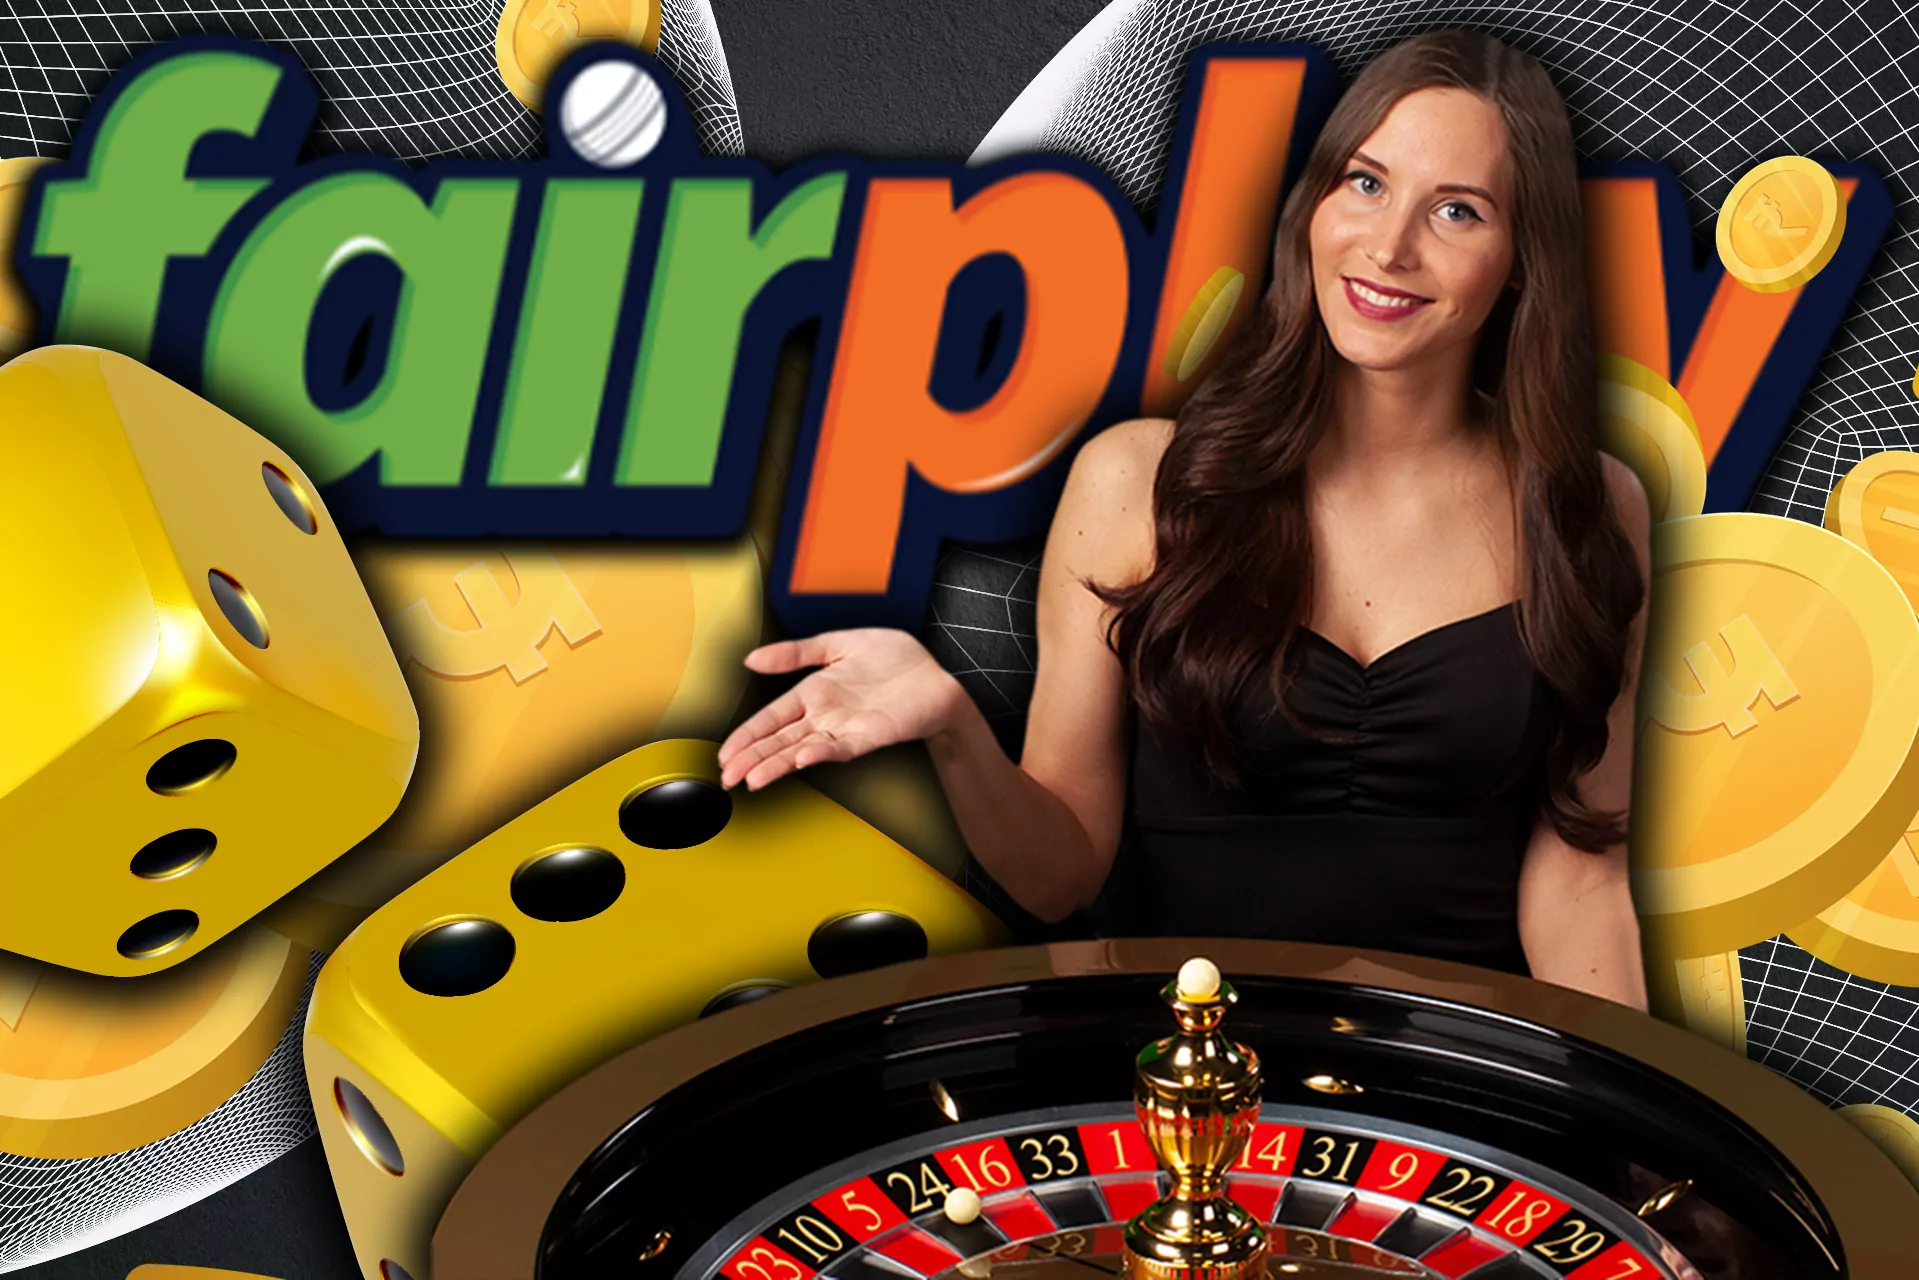 Play casino with real dealers.